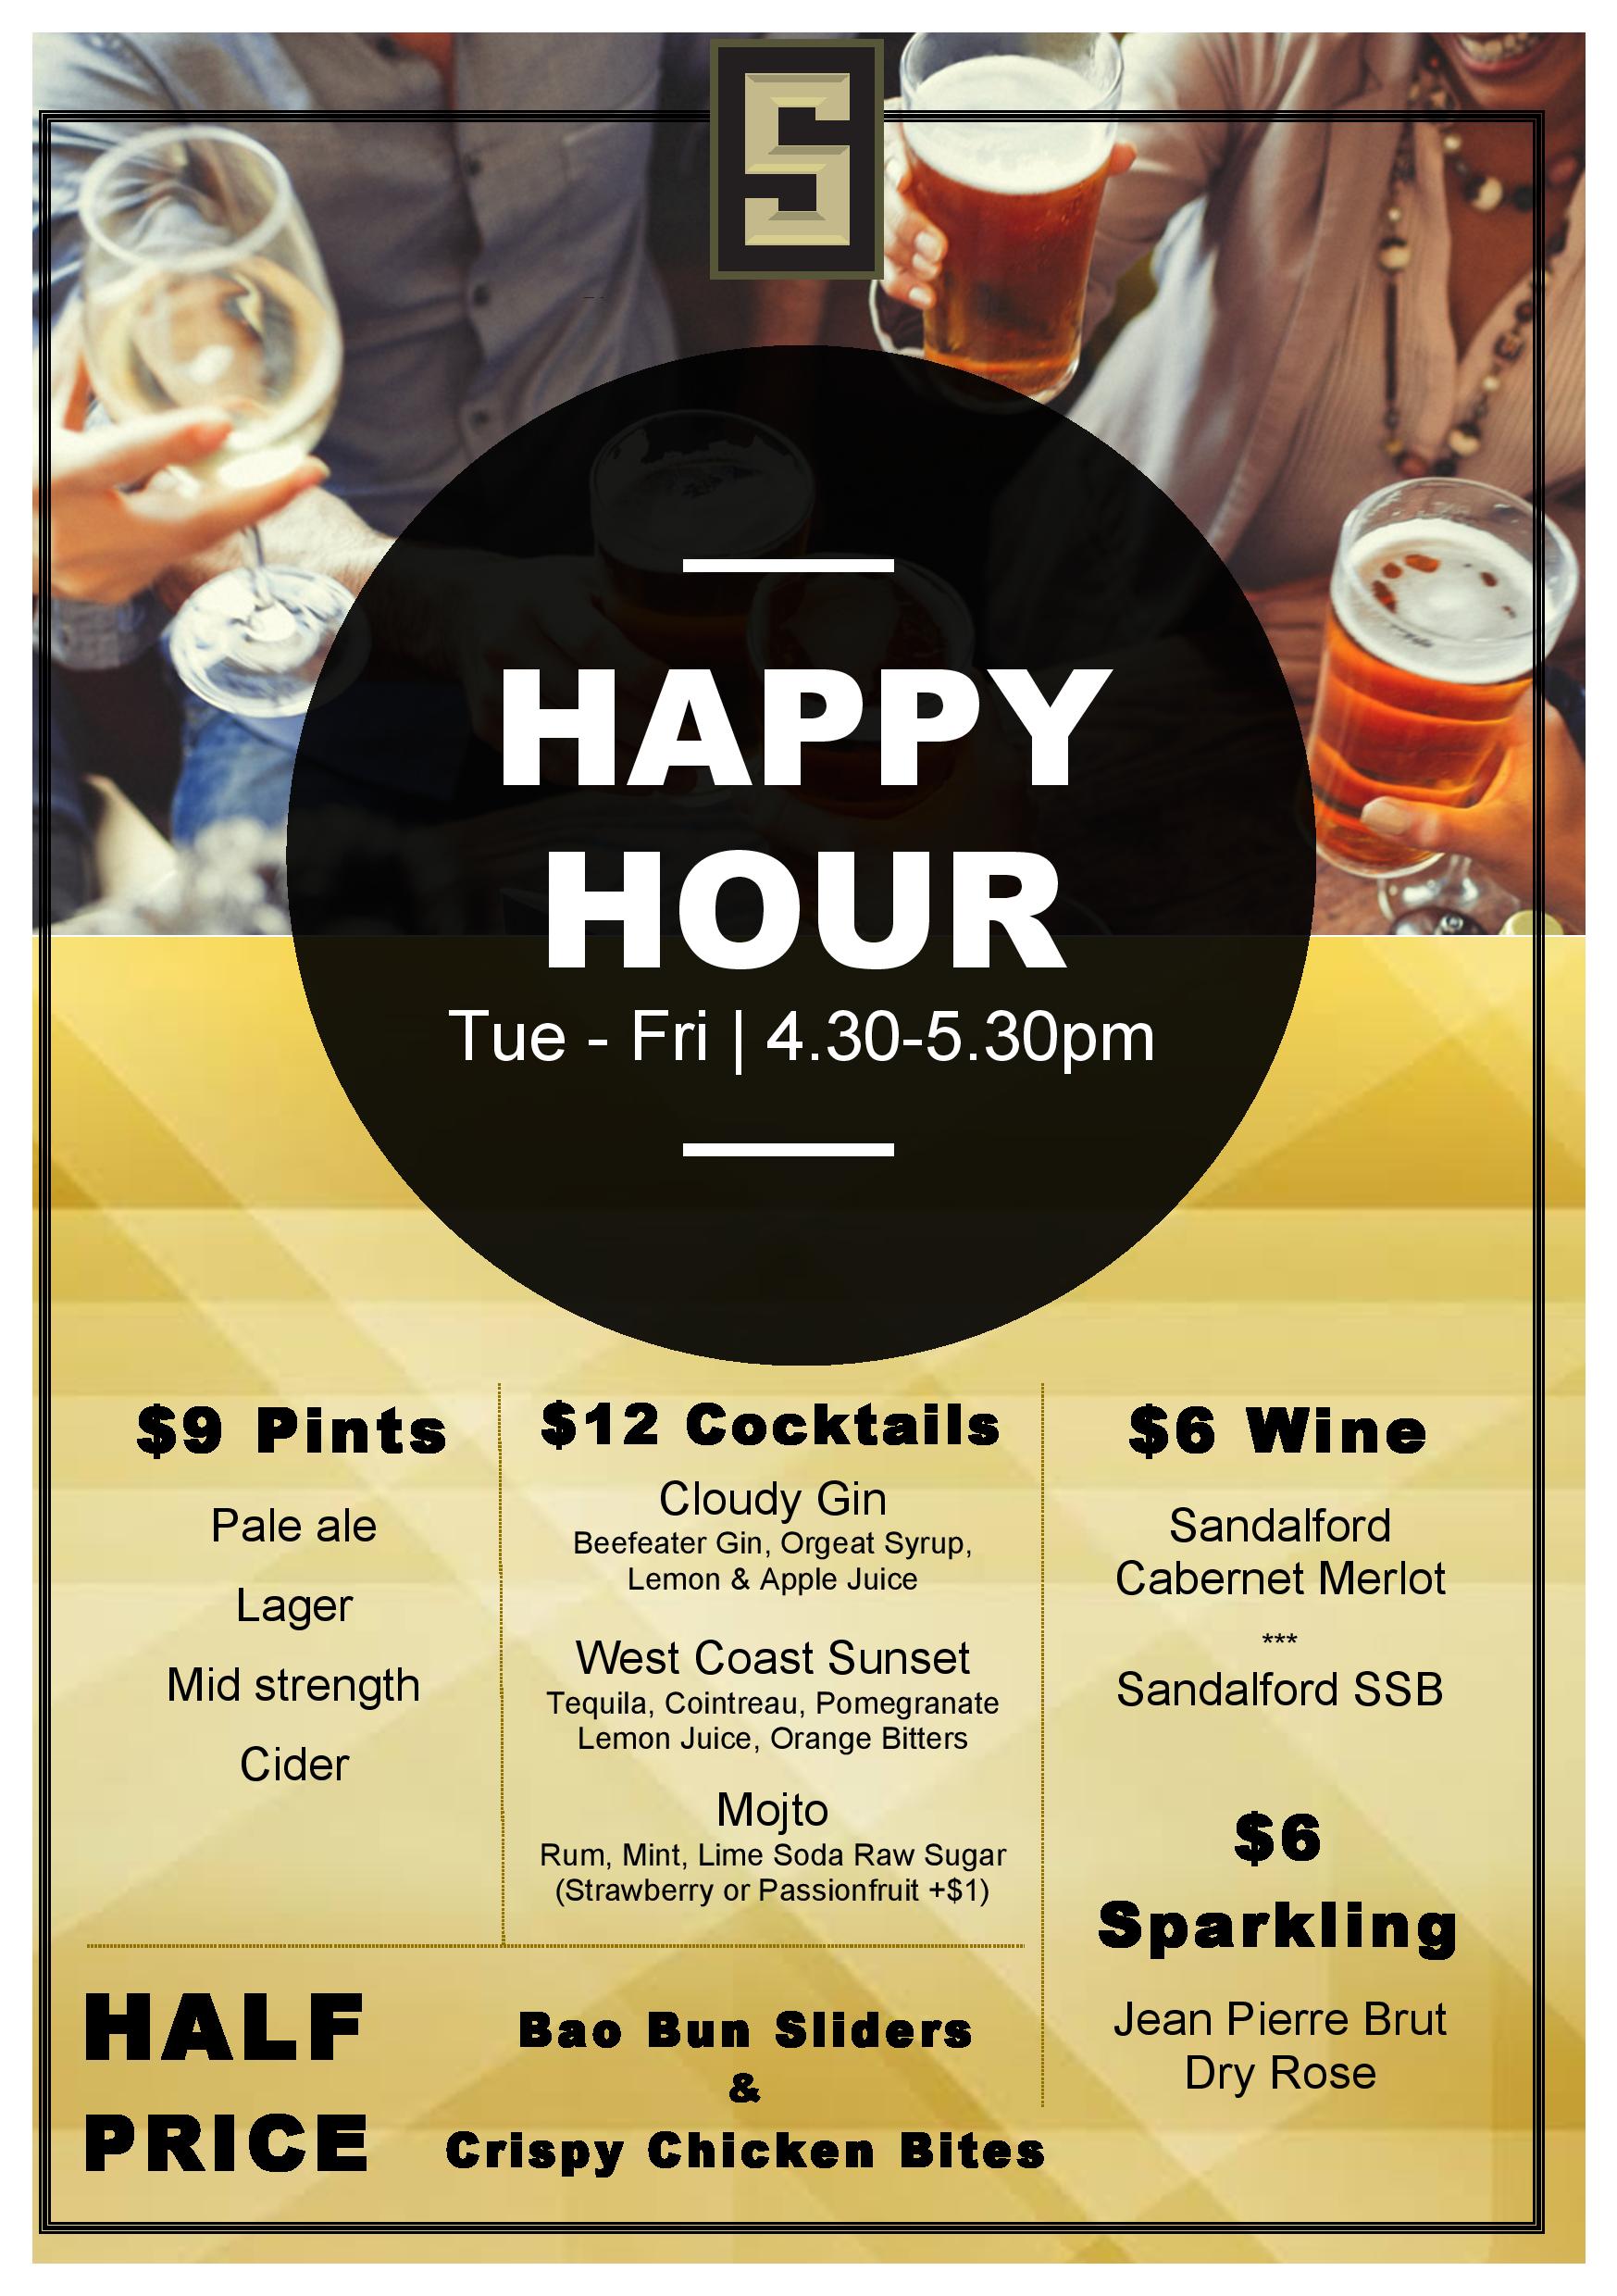 Happy hour poster page 001 Sentinel Bar and Grill